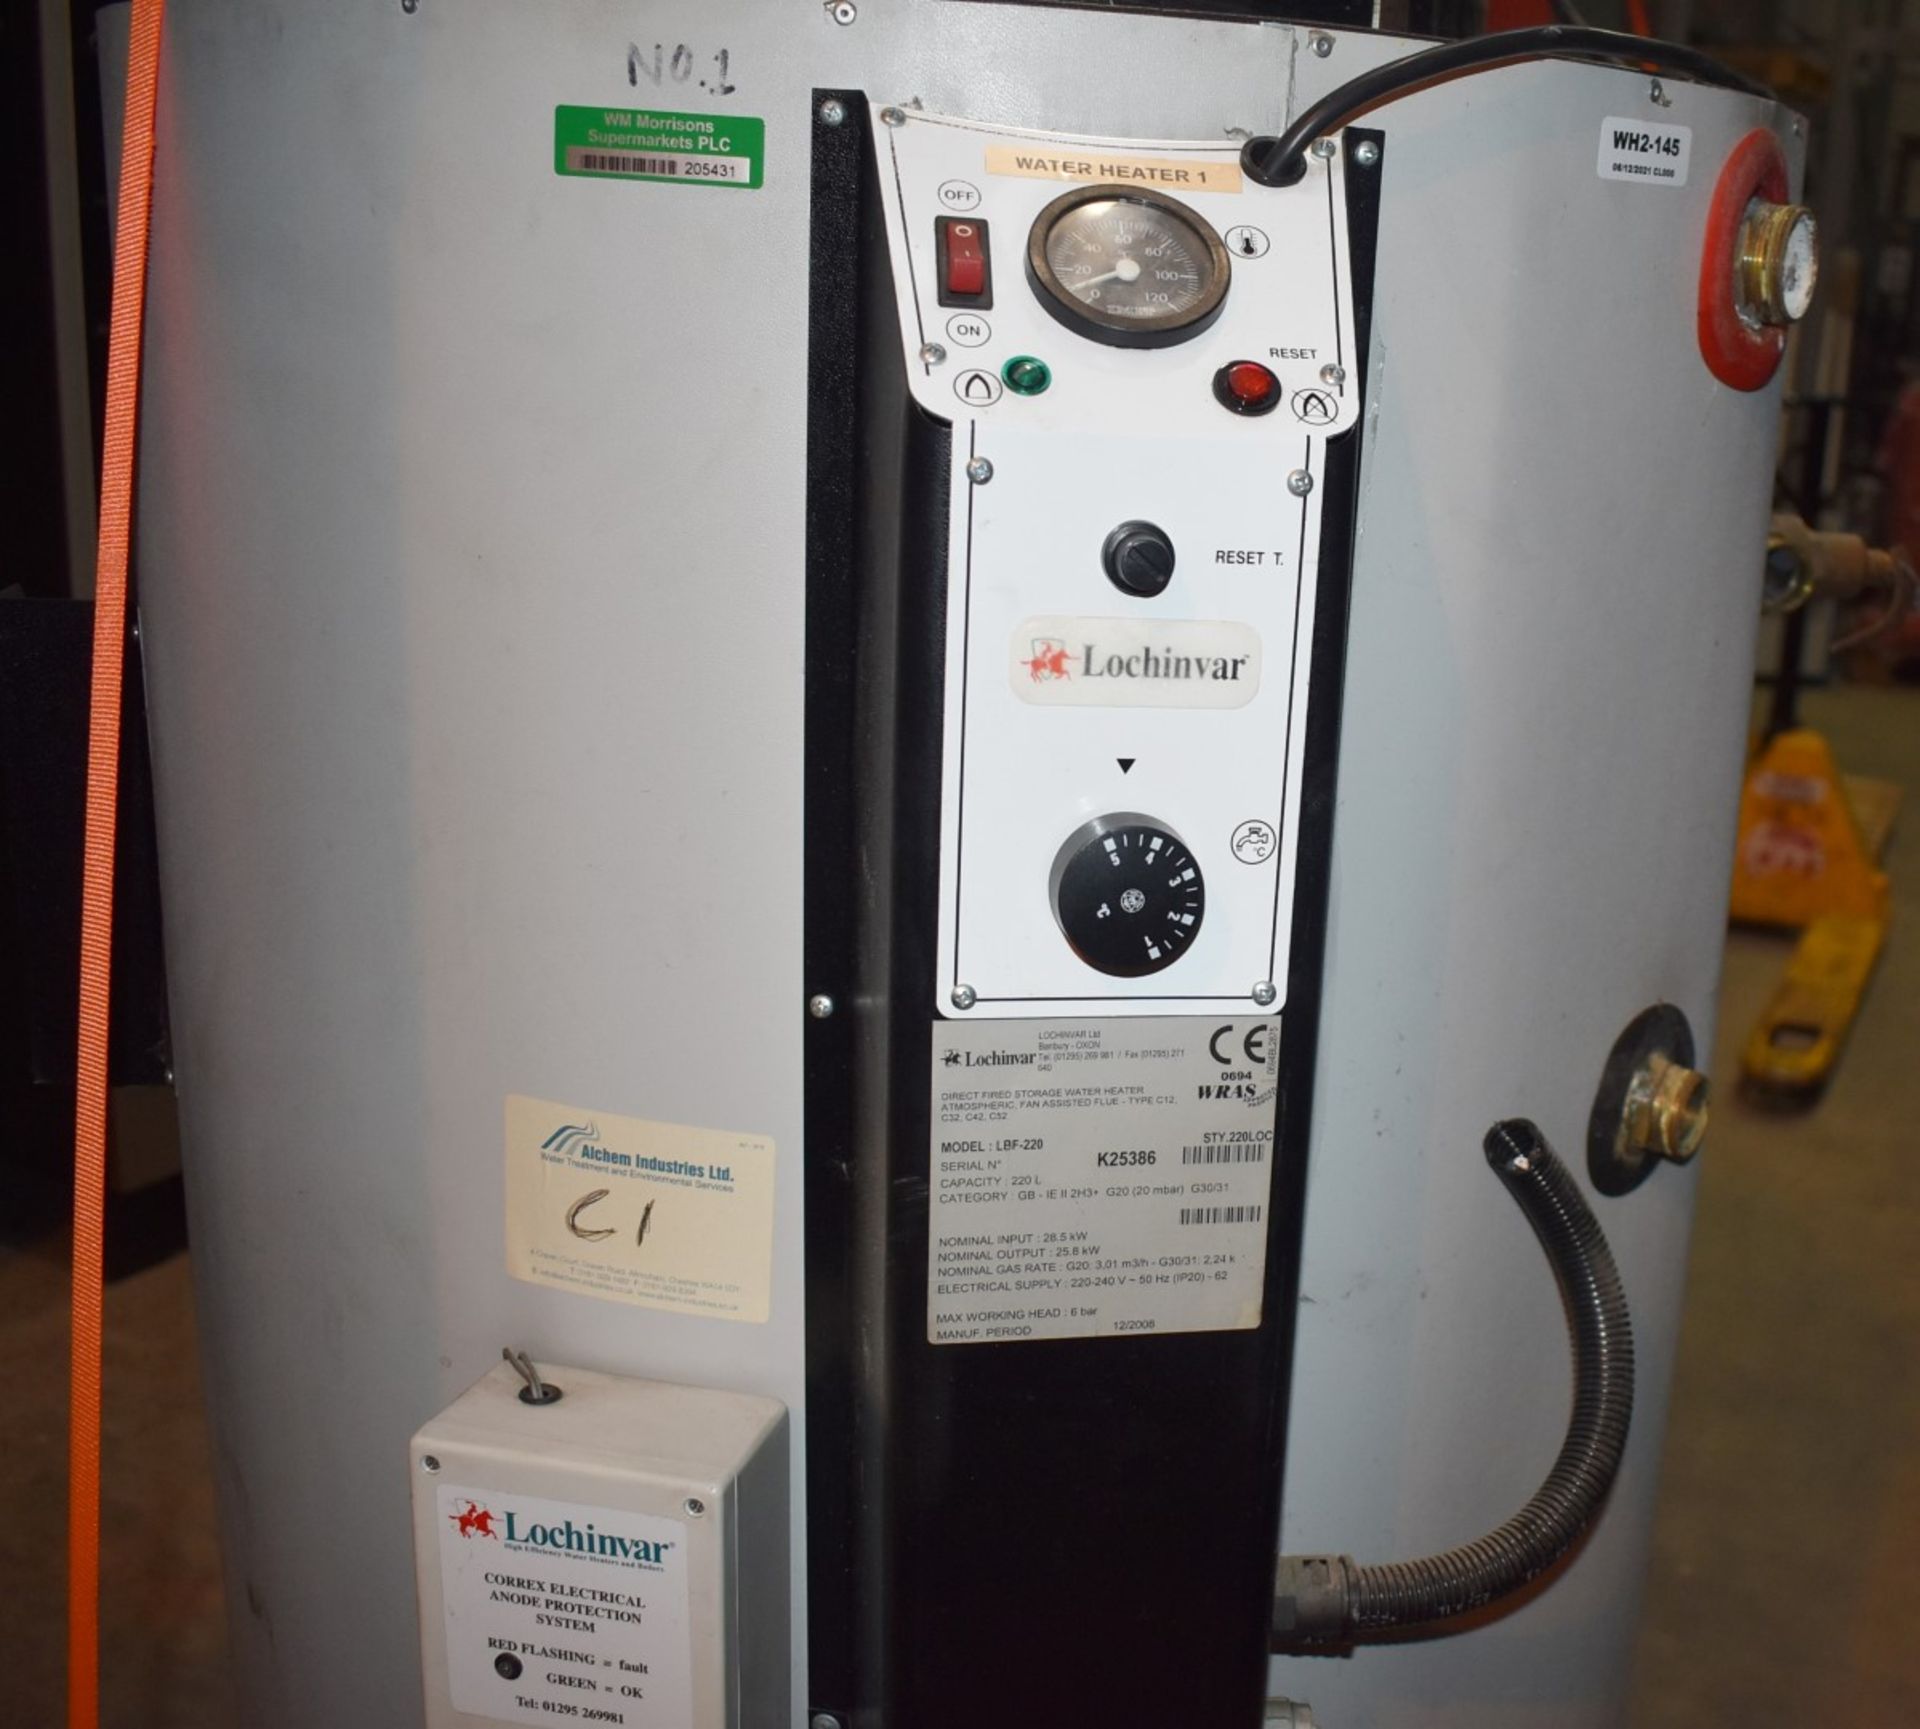 1 x Lochinvar High Efficiency Gas Fired 220L Storage Water Heater - Model LBF-220 - Ref: WH2-145 H5D - Image 11 of 14